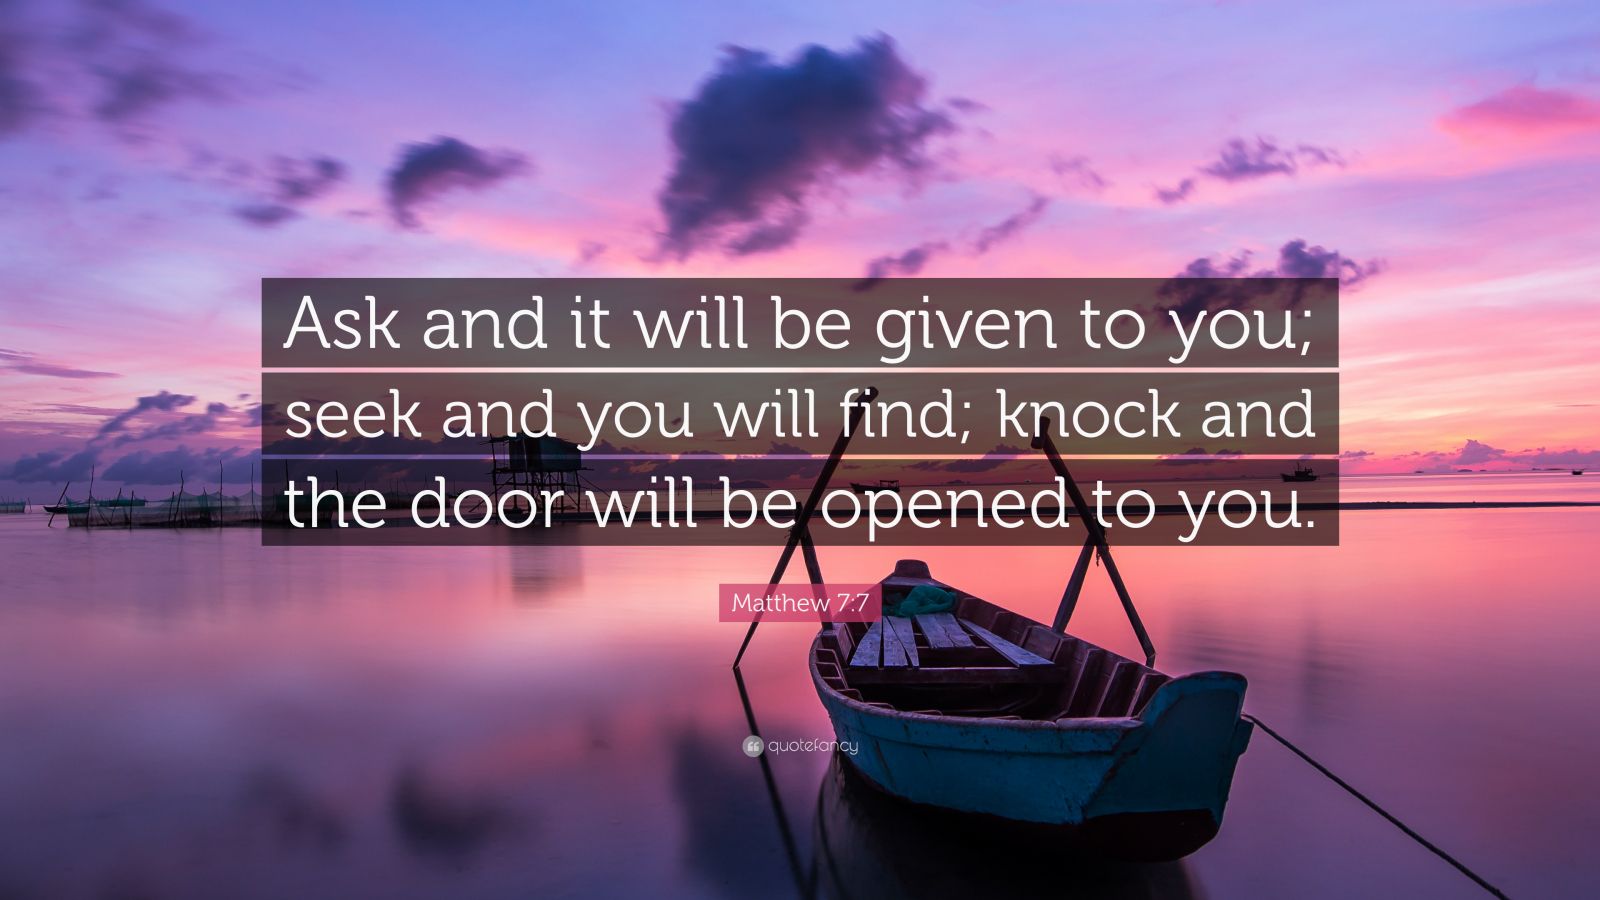 matthew-7-7-quote-ask-and-it-will-be-given-to-you-seek-and-you-will